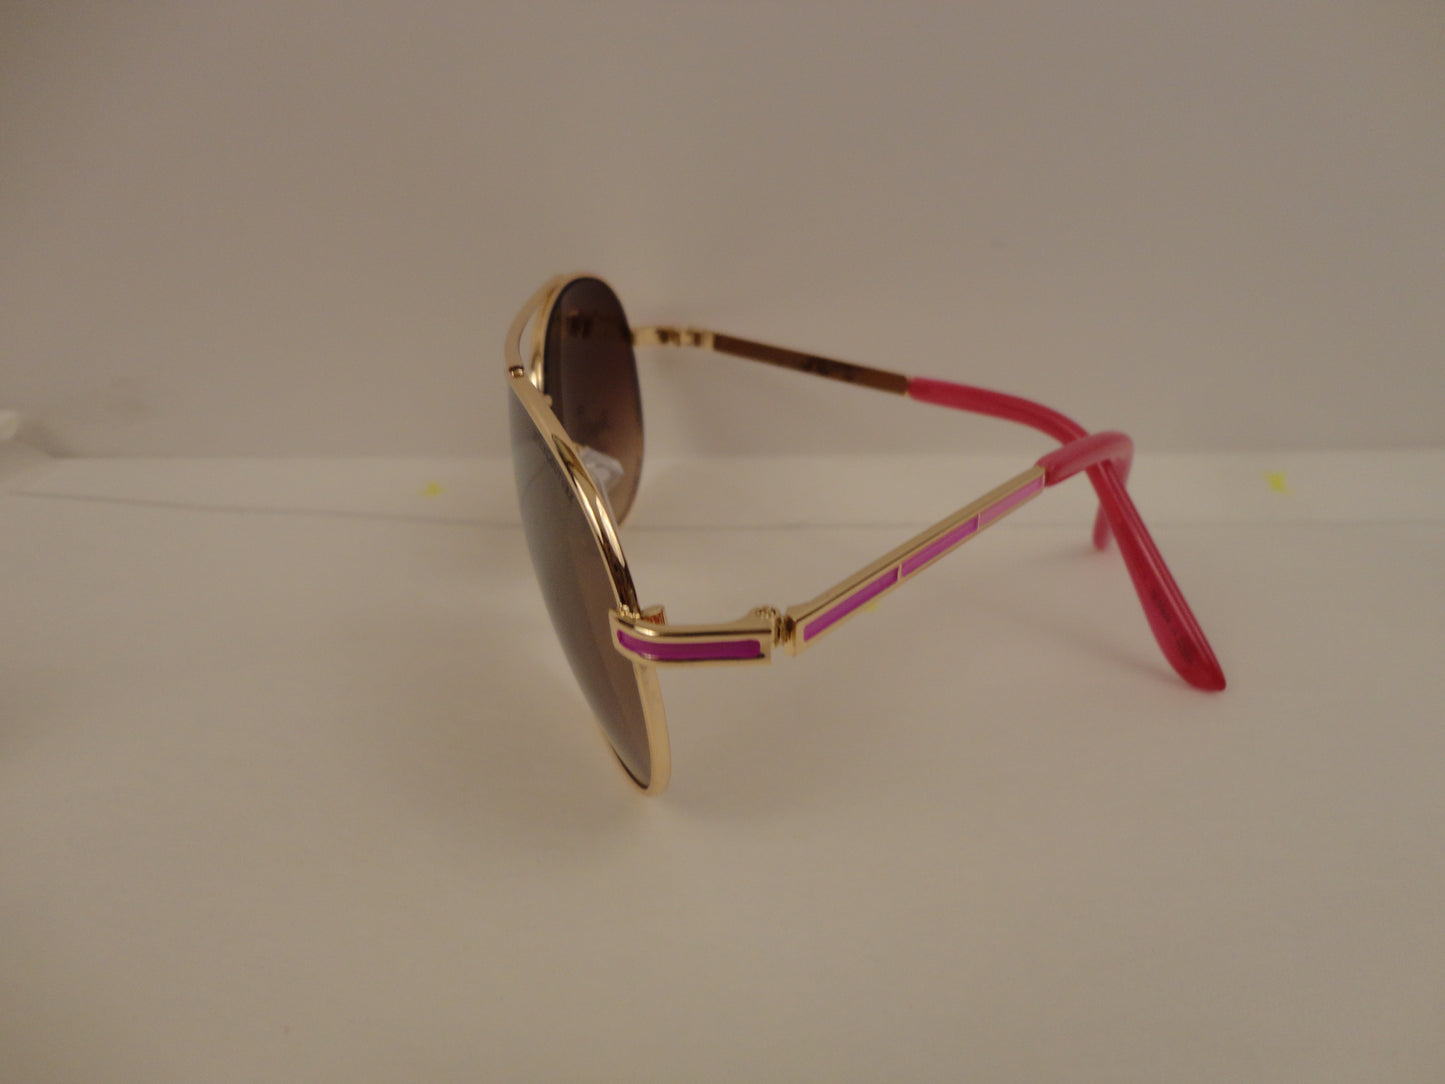 Juicy Couture Sunglasses Gold & Hot Pink Frames NWT SKU 400-60